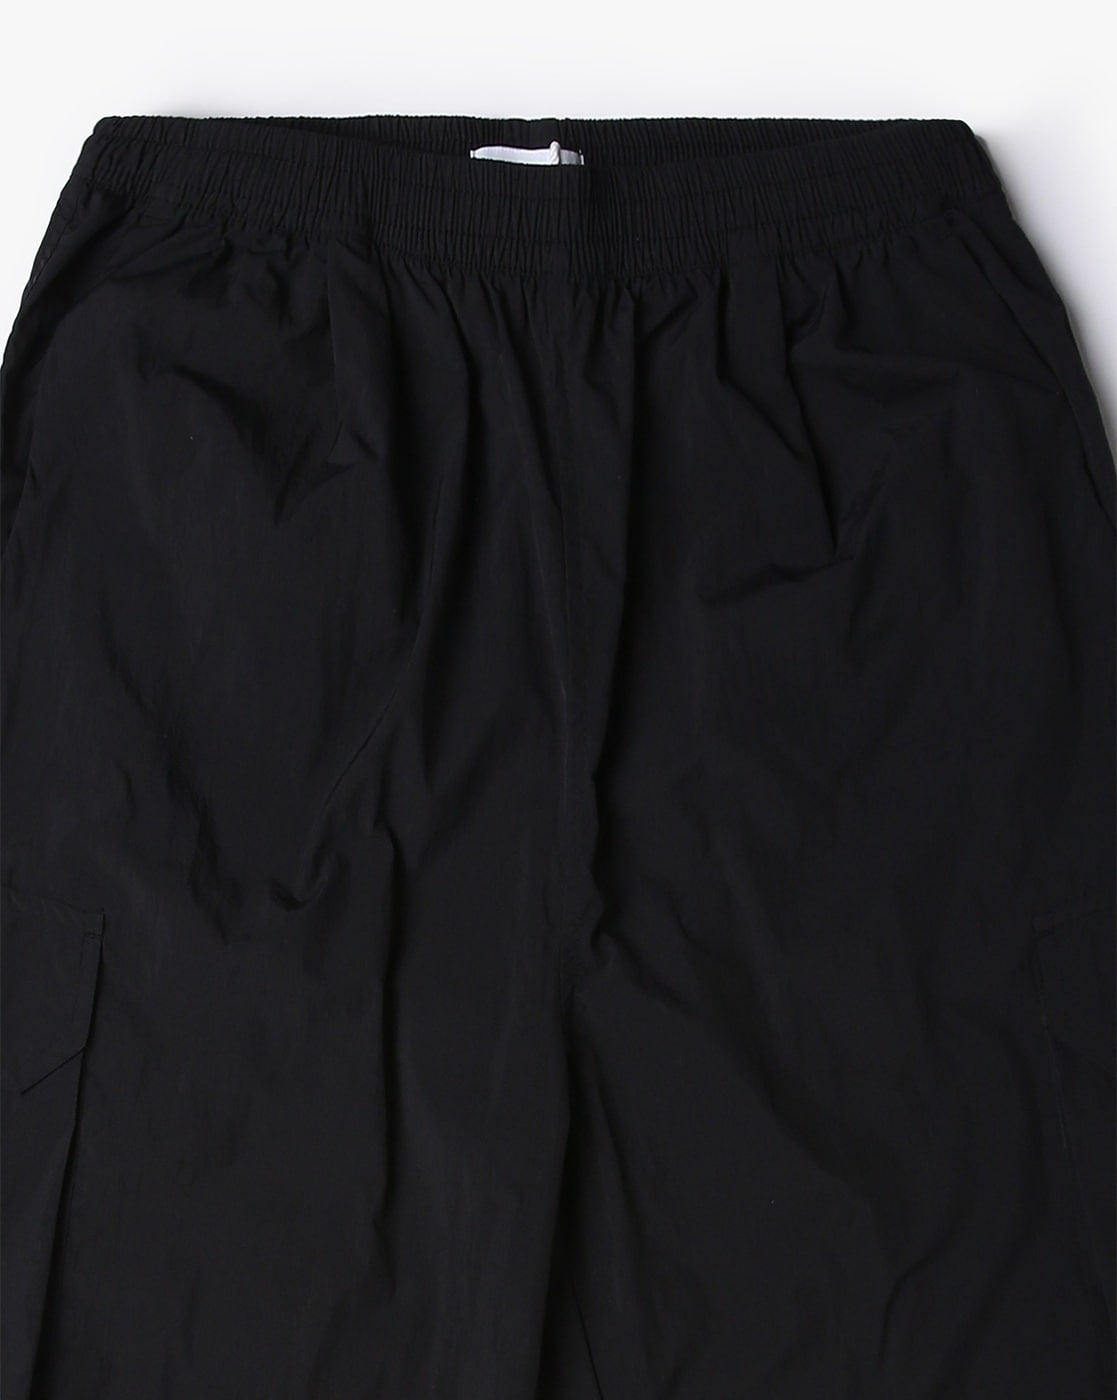 Buy Jet Black Trousers & Pants for Girls by Outryt Online